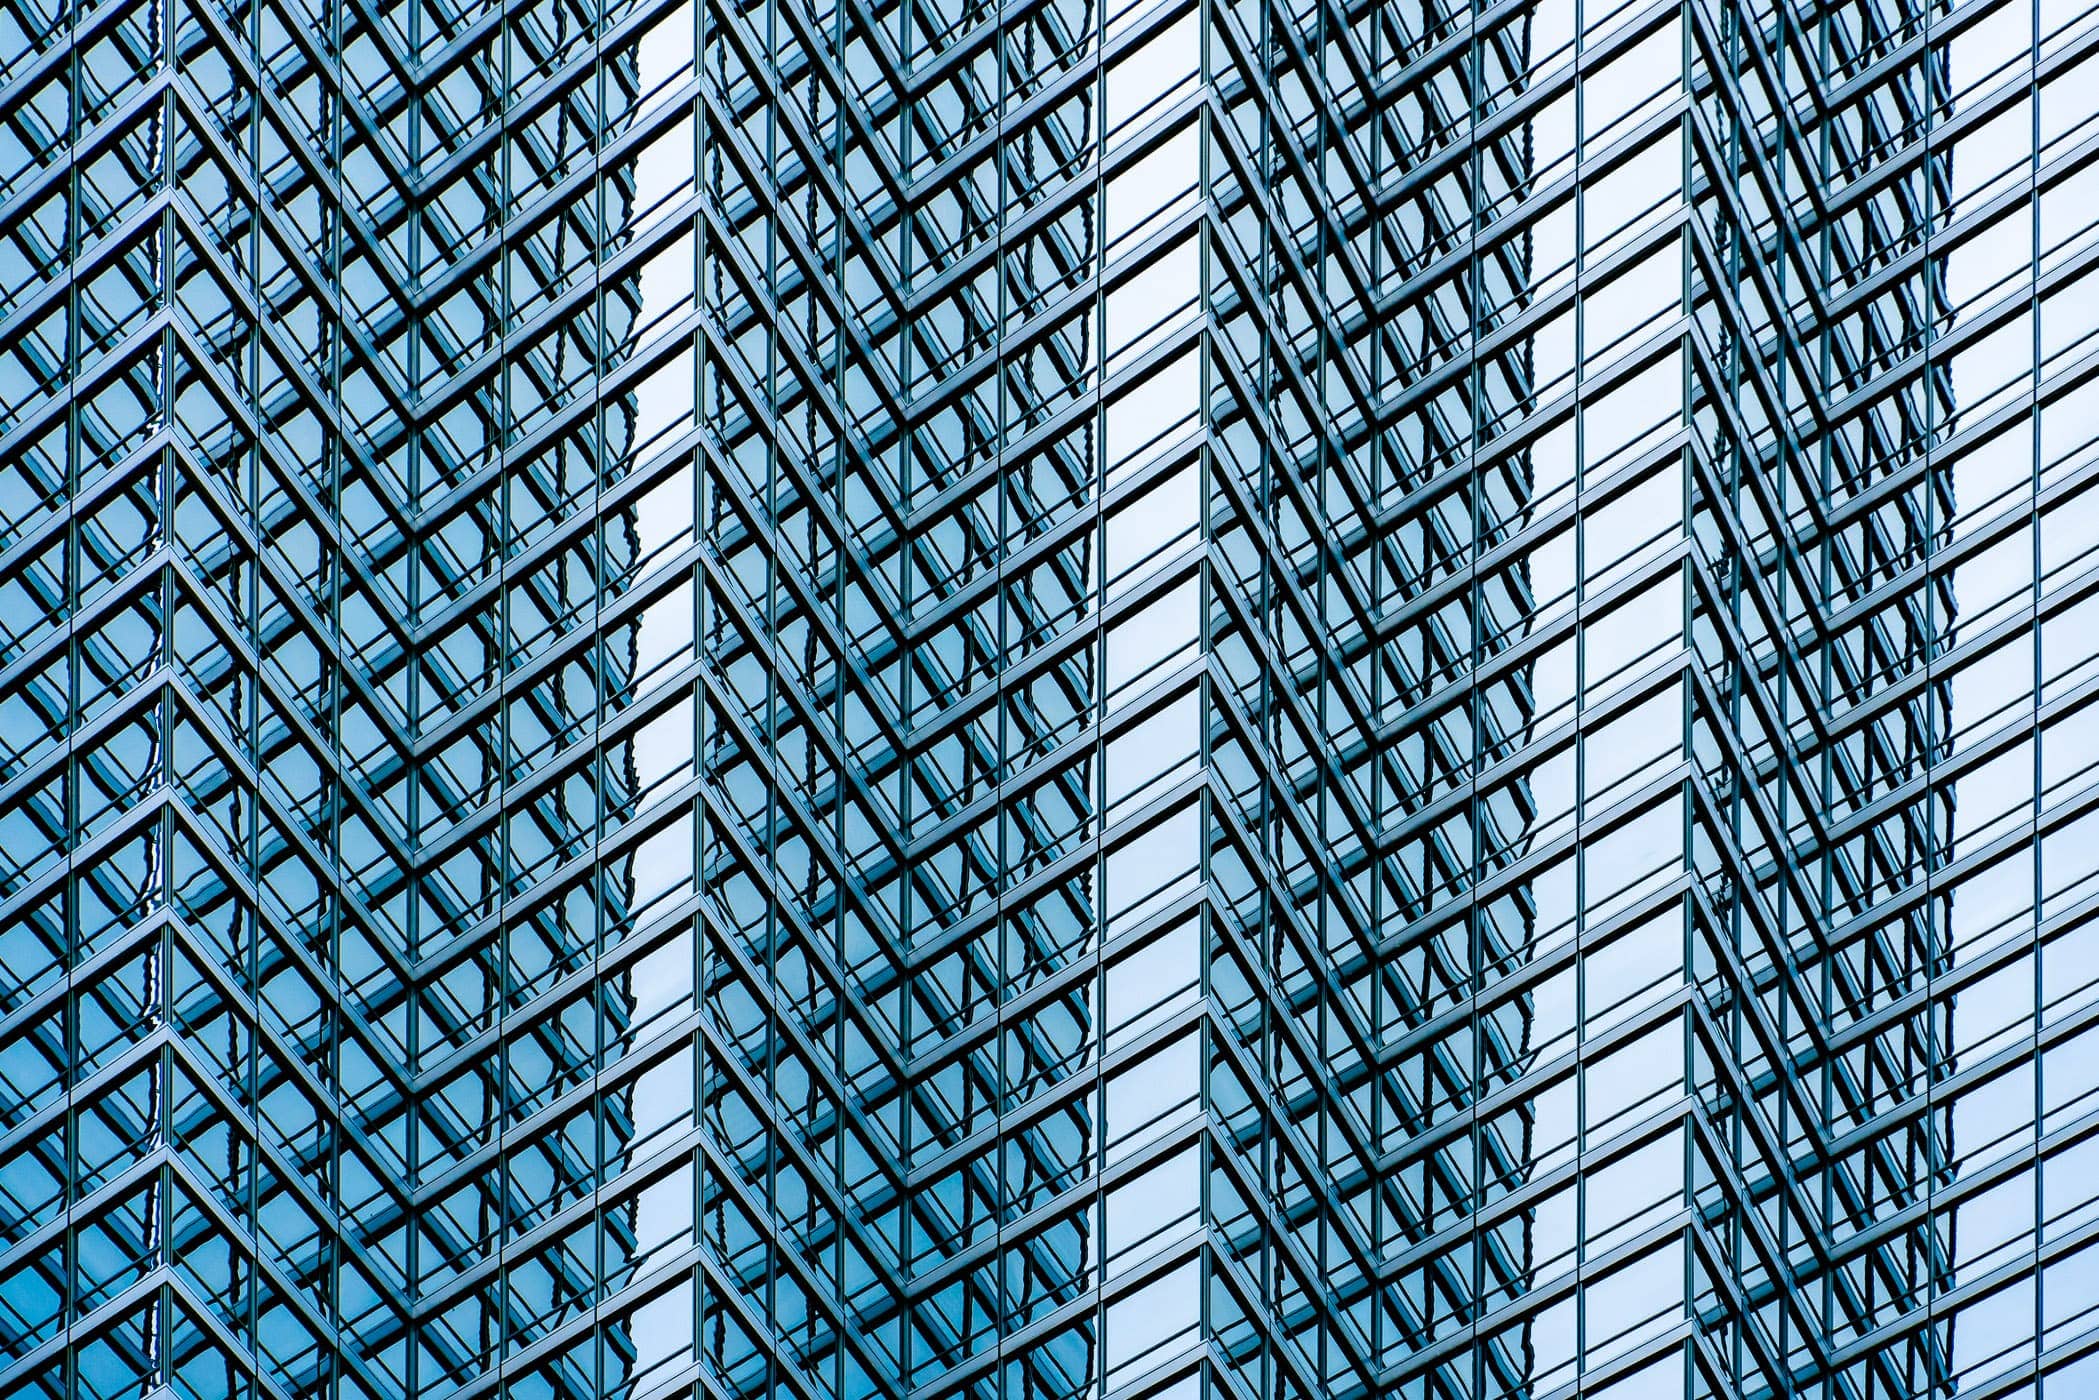 Abstract architectural detail of Downtown Dallas' Bank of America Plaza.